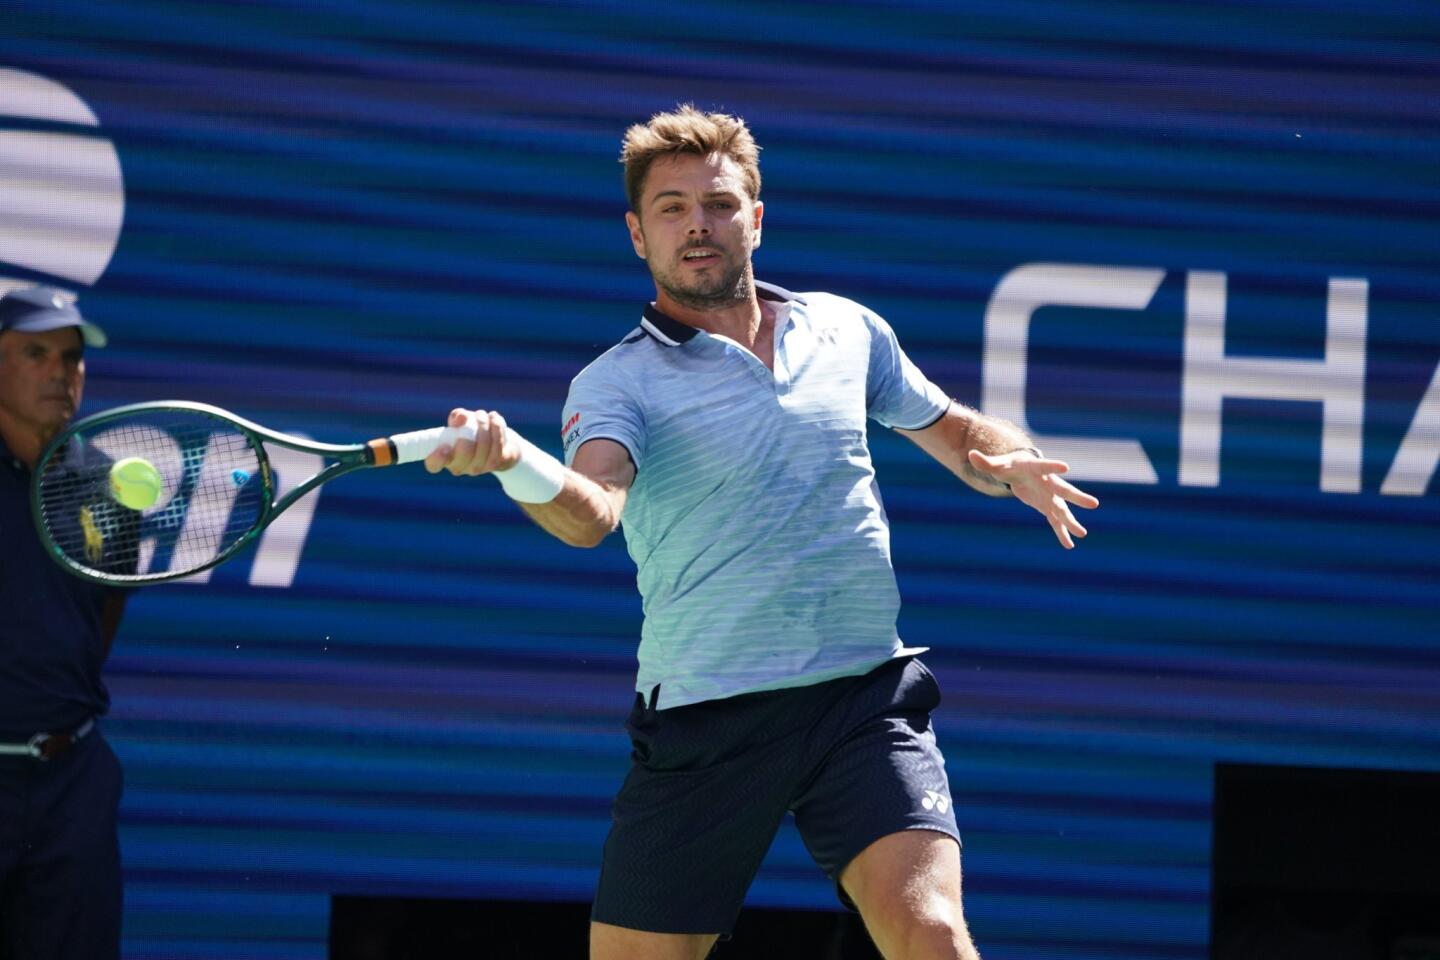 Stan Wawrinka of Switzerland plays against Daniil Medvedev of Russia during their Men's Singles Quarterfinal match at the 2019 U.S. Open at the USTA Billie Jean King National Tennis Center in New York on Sept. 3, 2019.